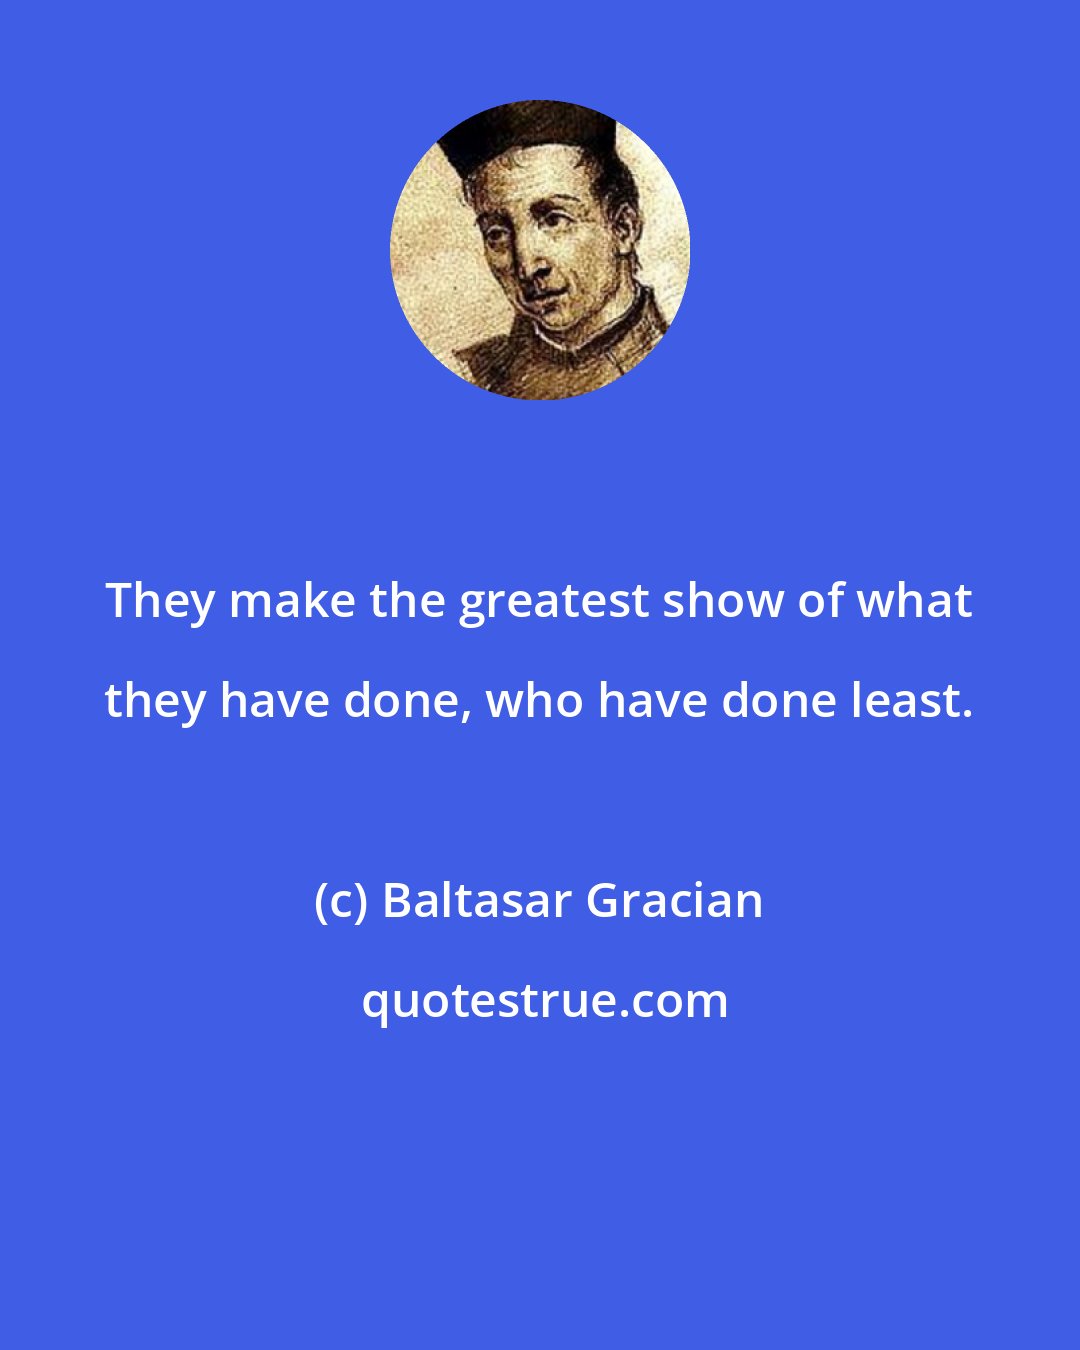 Baltasar Gracian: They make the greatest show of what they have done, who have done least.